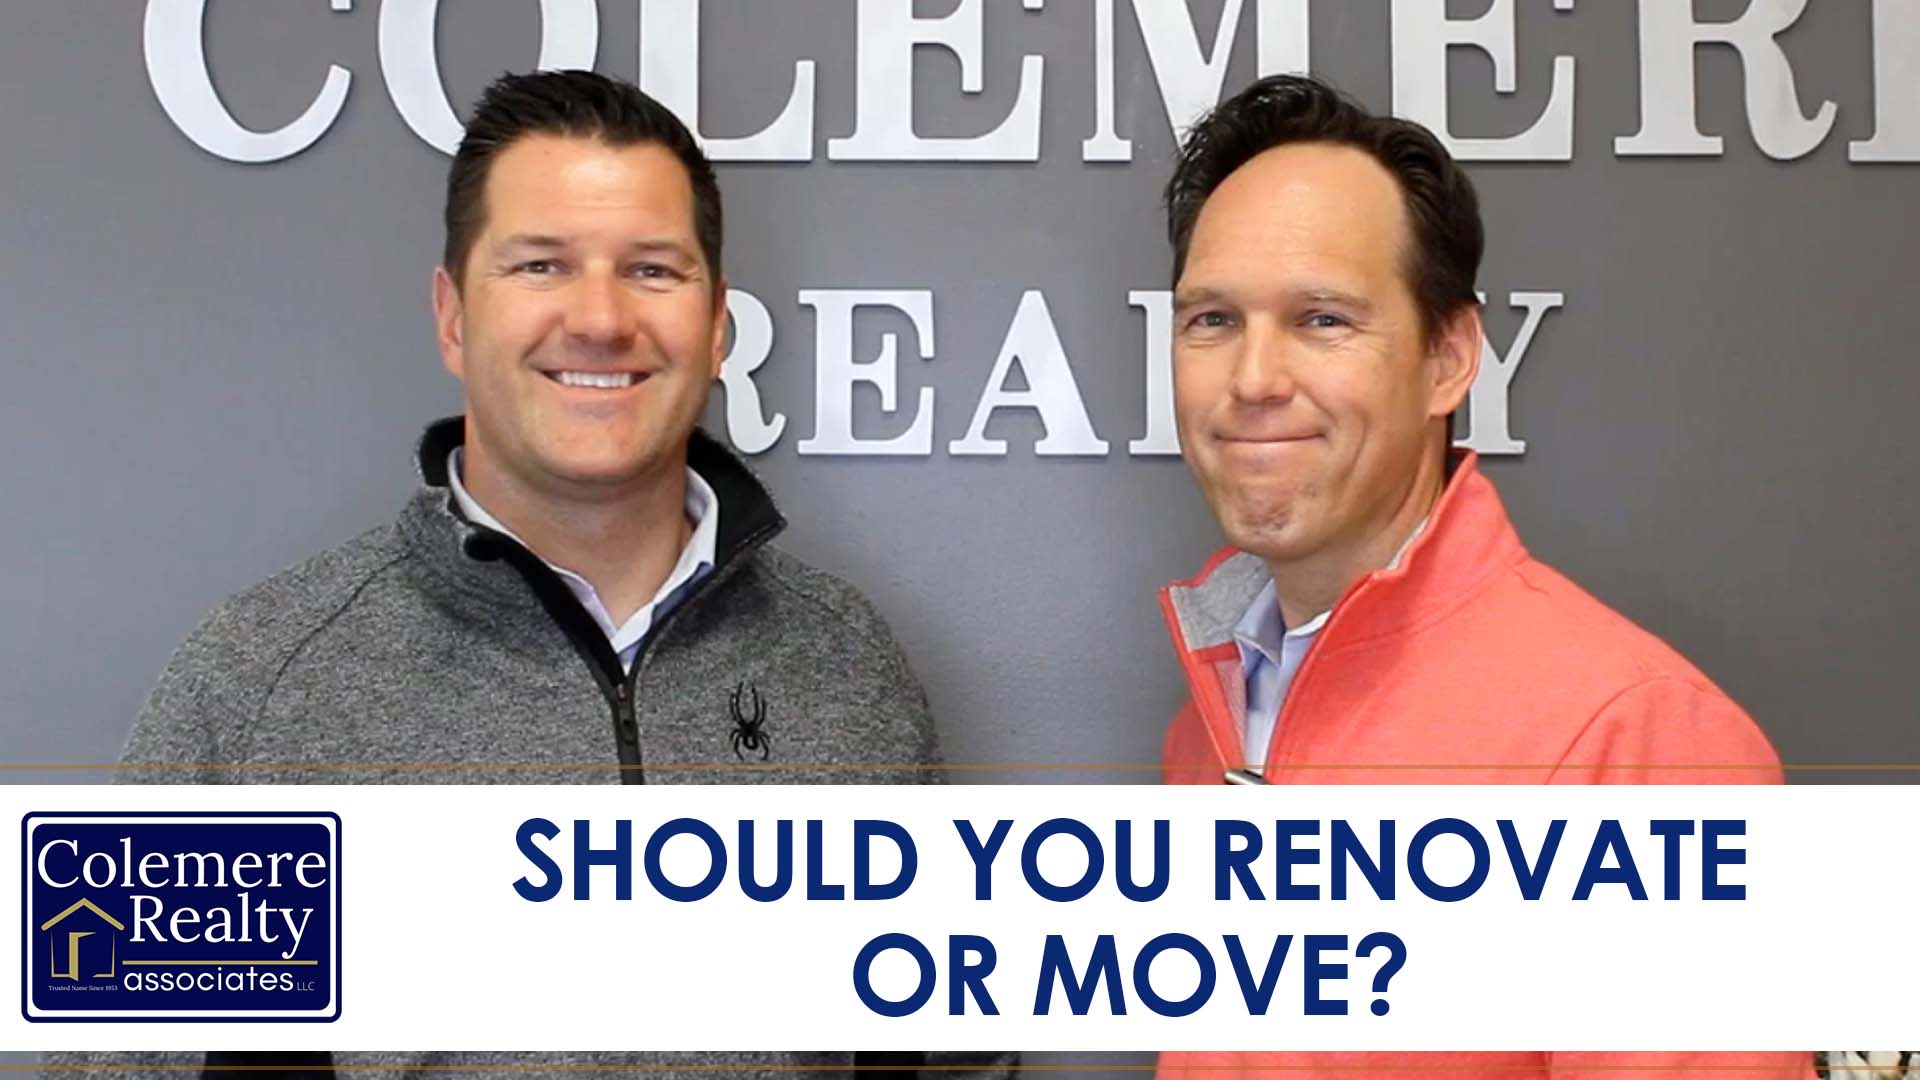 4 Things To Consider When Deciding To Renovate or Move